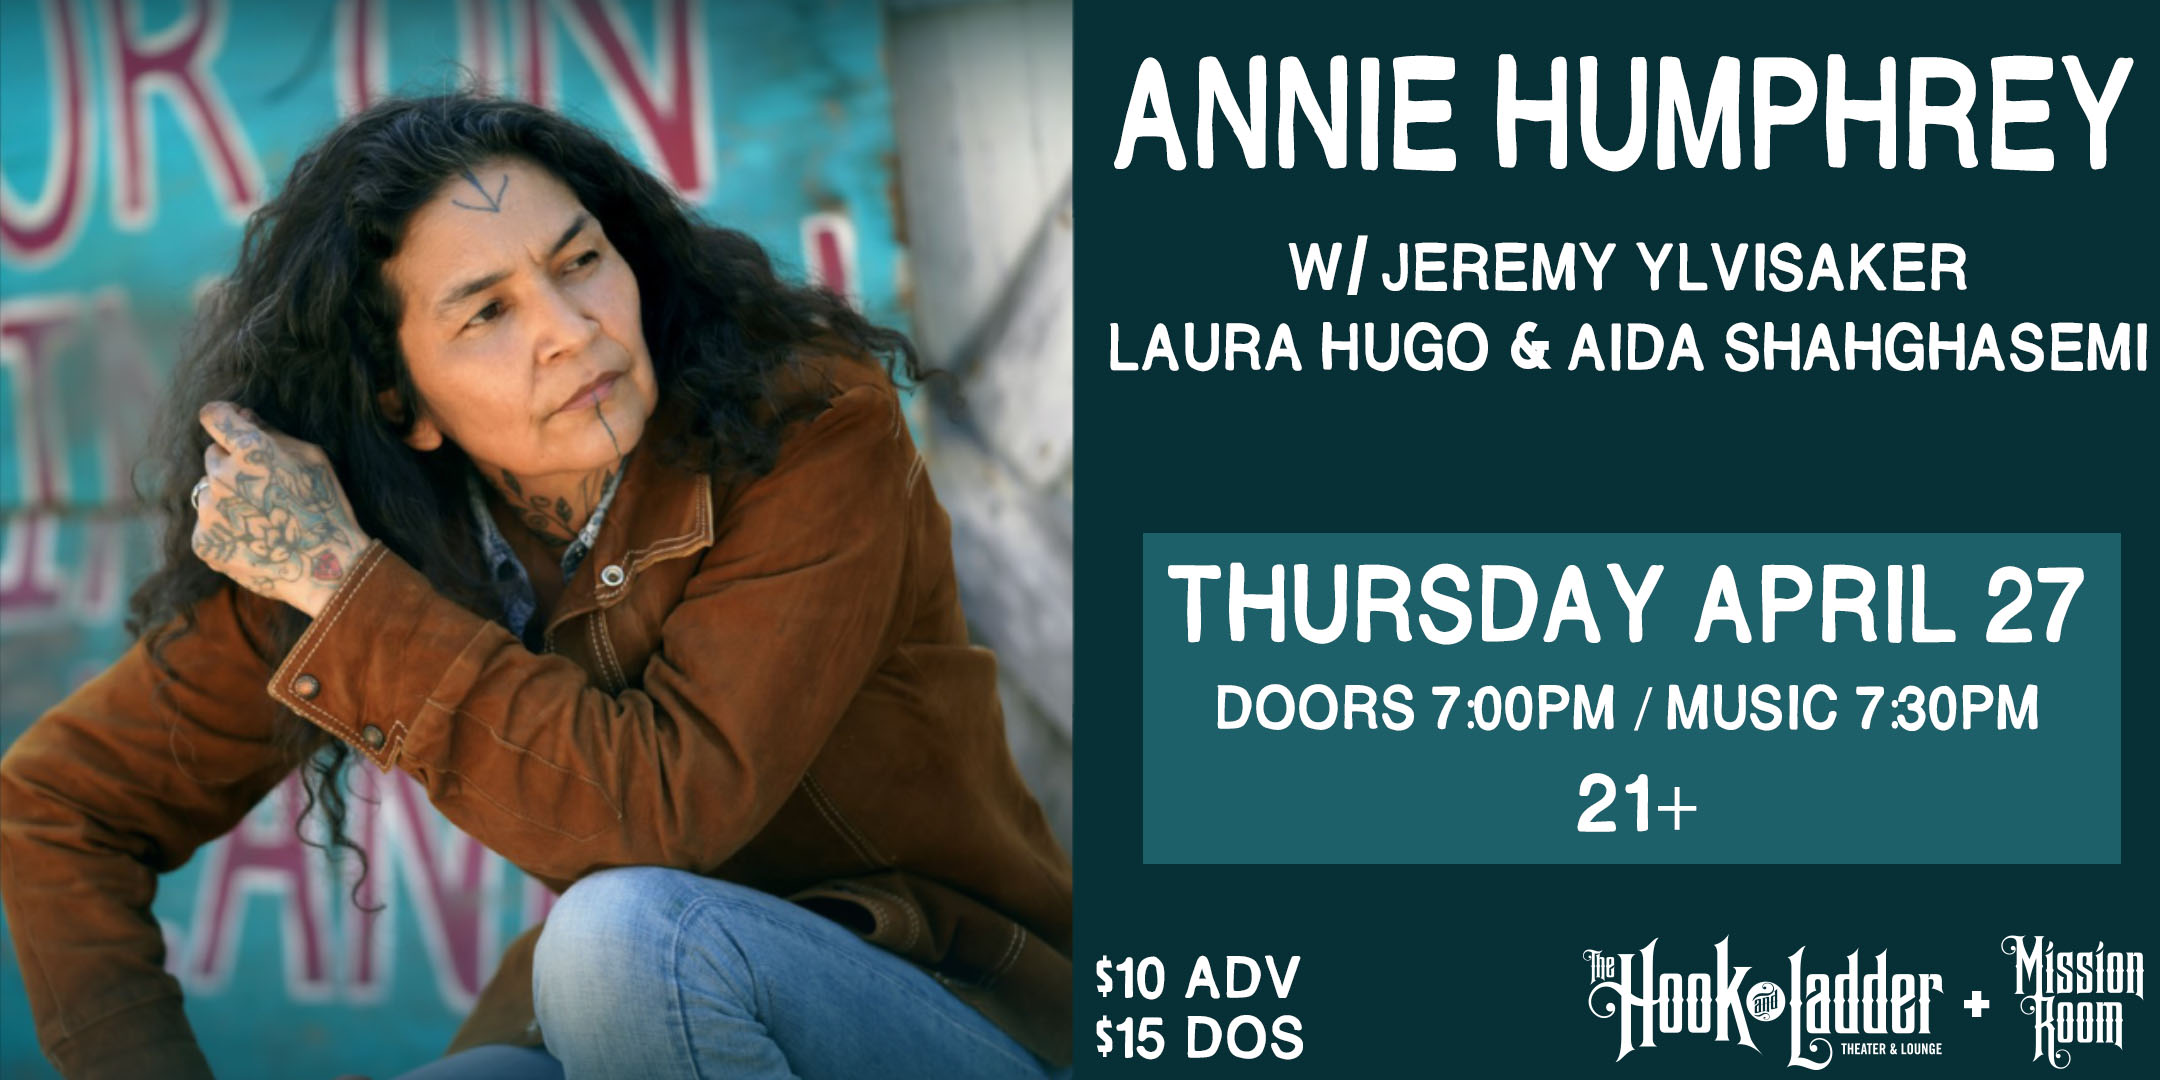 Annie Humphrey w/ Jeremy Ylvisaker, Laura Hugo, & Aida Shahghasemi Thursday April 27 The Mission Room at The Hook and Ladder Theater Doors 7:00pm :: Music 7:30pm :: 21+ General Admission $10 ADV / $15 DOS NO REFUNDS